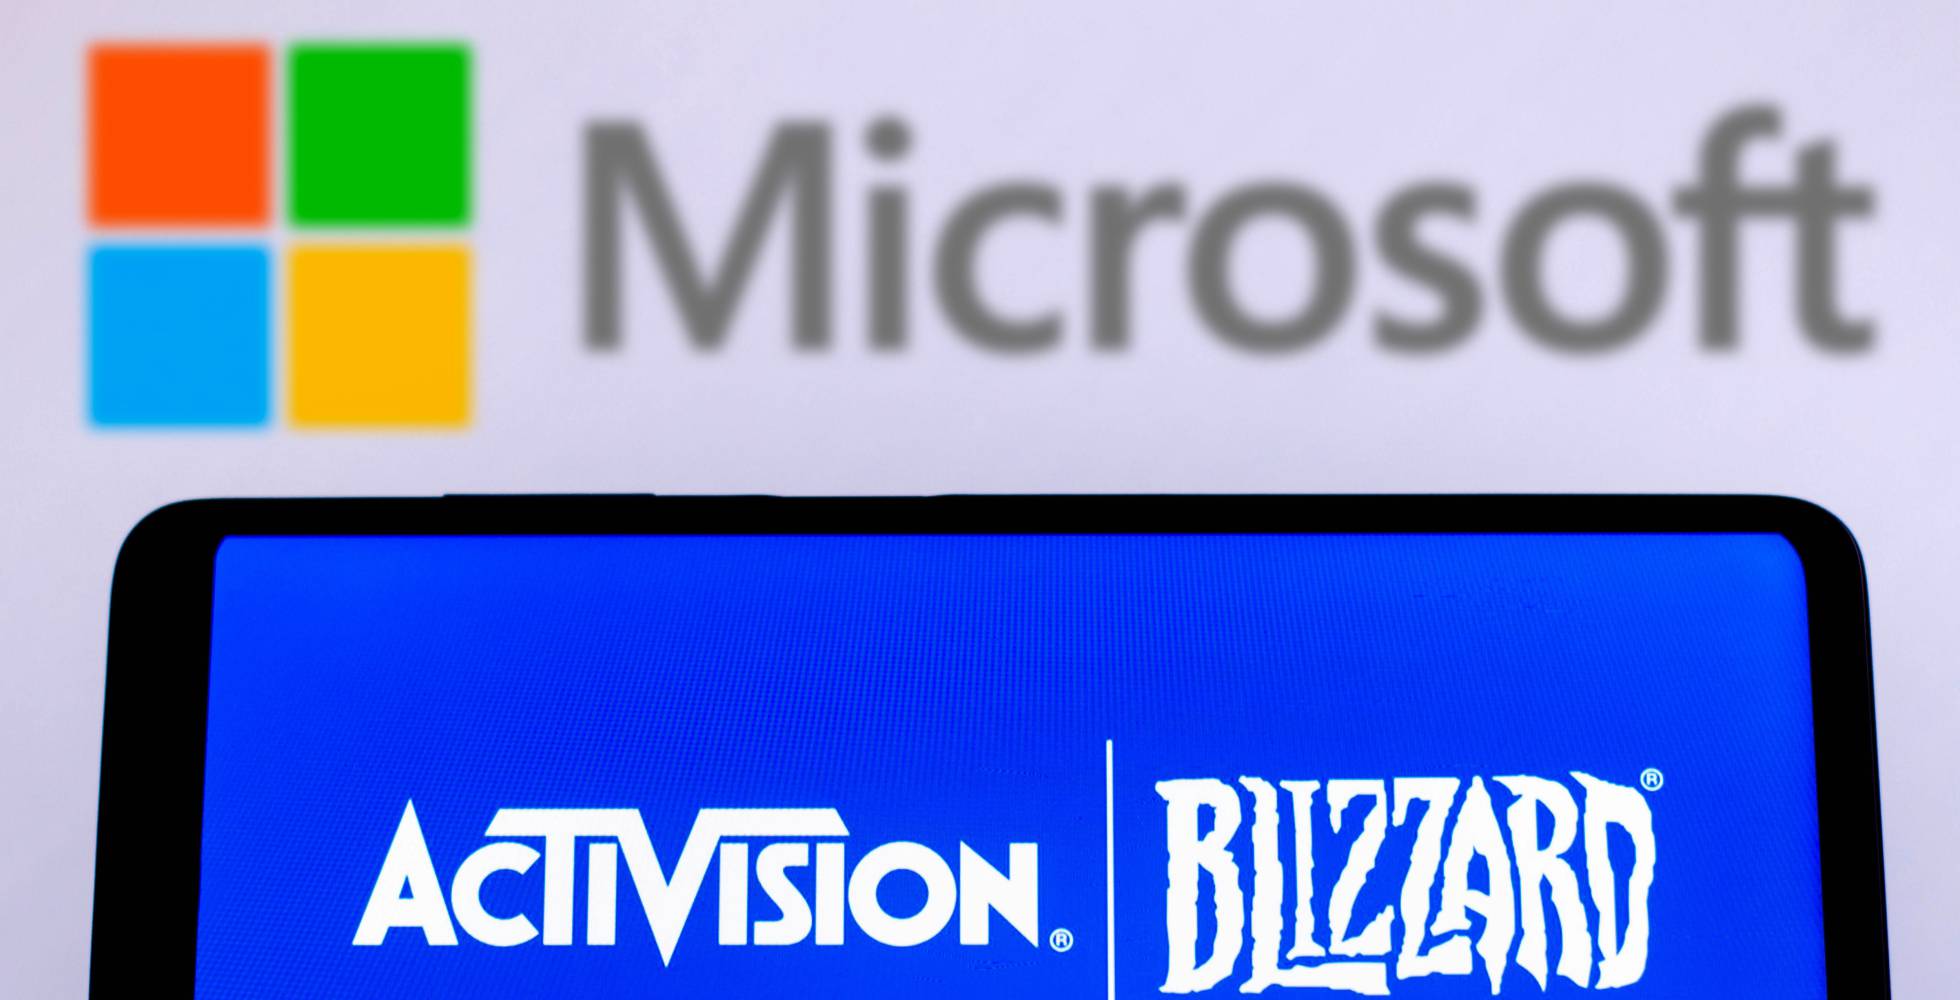 Microsoft does not give up and defends its purchase of Activision